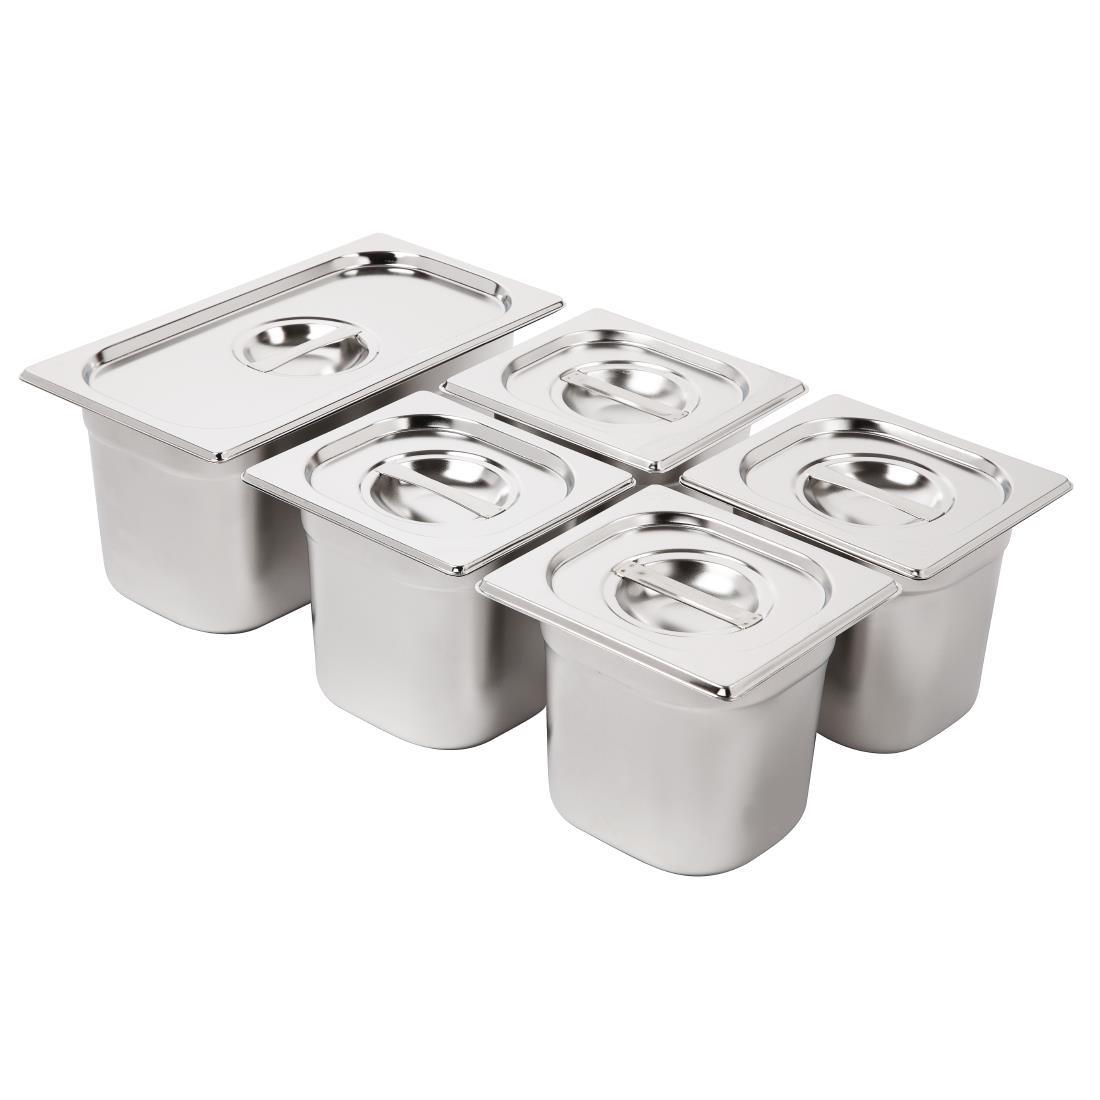 Vogue Stainless Steel Gastronorm Pan Set 1/3 and 4 x 1/6 with Lids - SA246  - 1